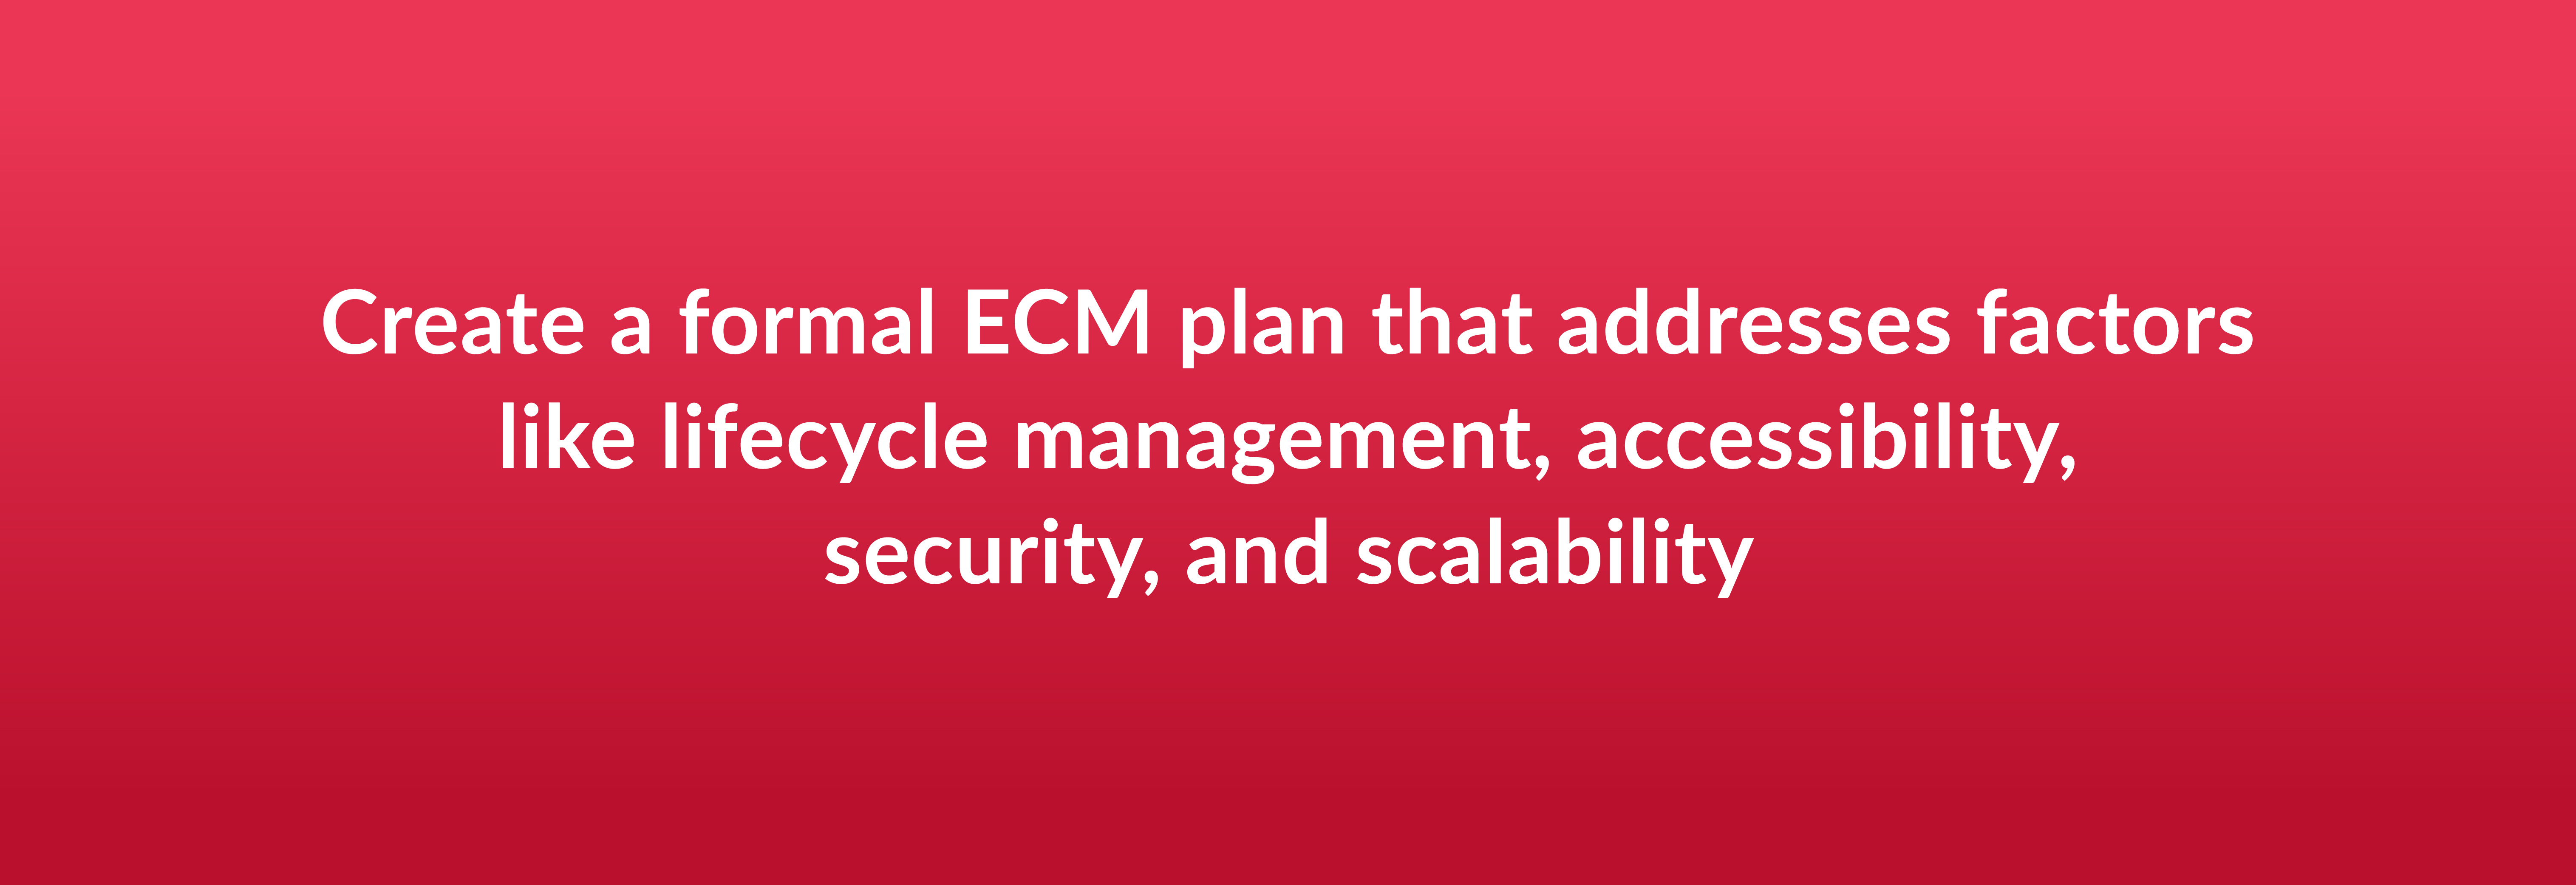 Create a formal ECM plan that addresses factors like lifecycle management, accessibility, security, and scalability